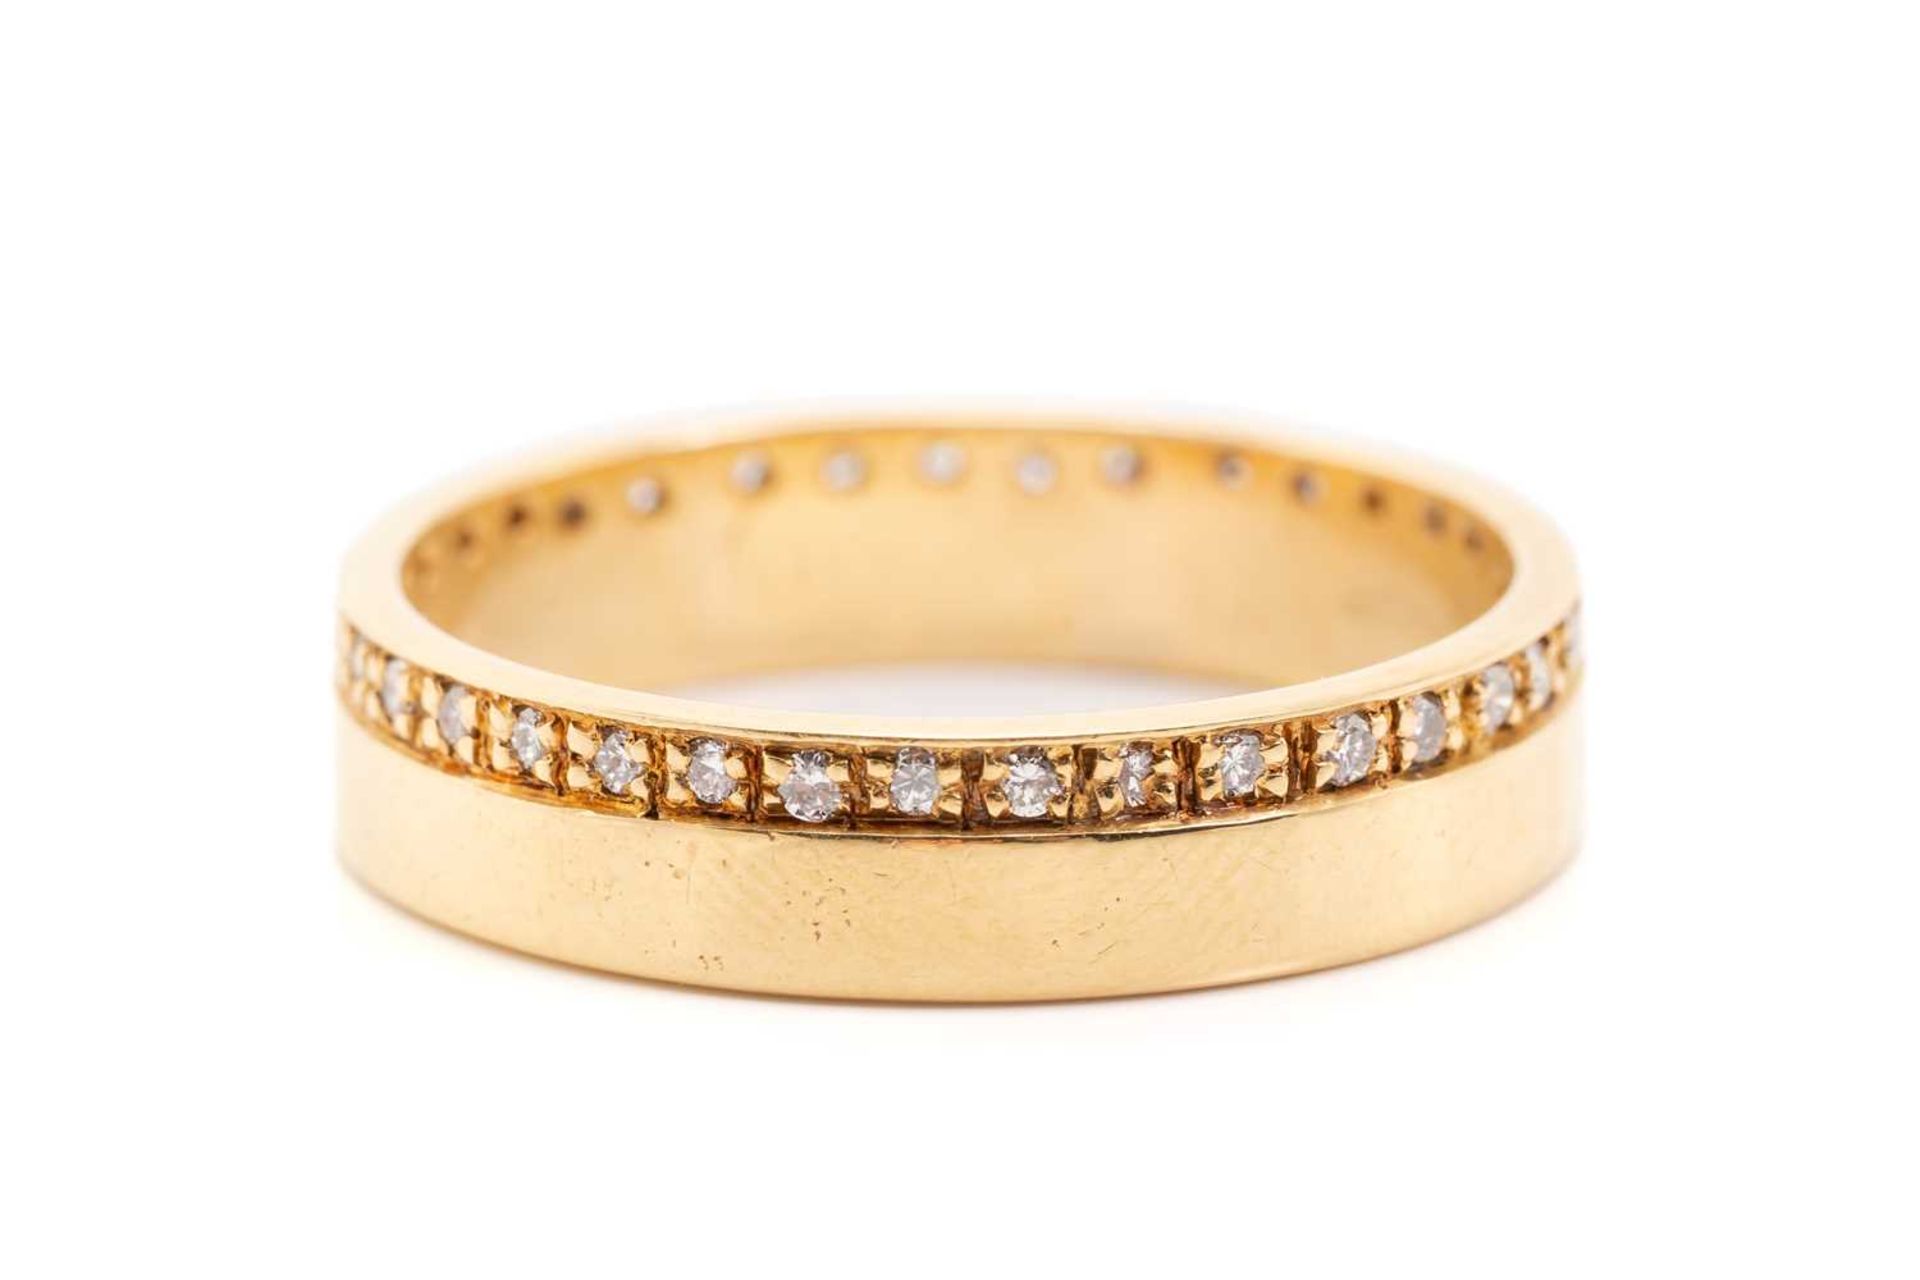 An 18ct yellow gold and diamond wedding band, comprising a flat band pavé-set with a continuous